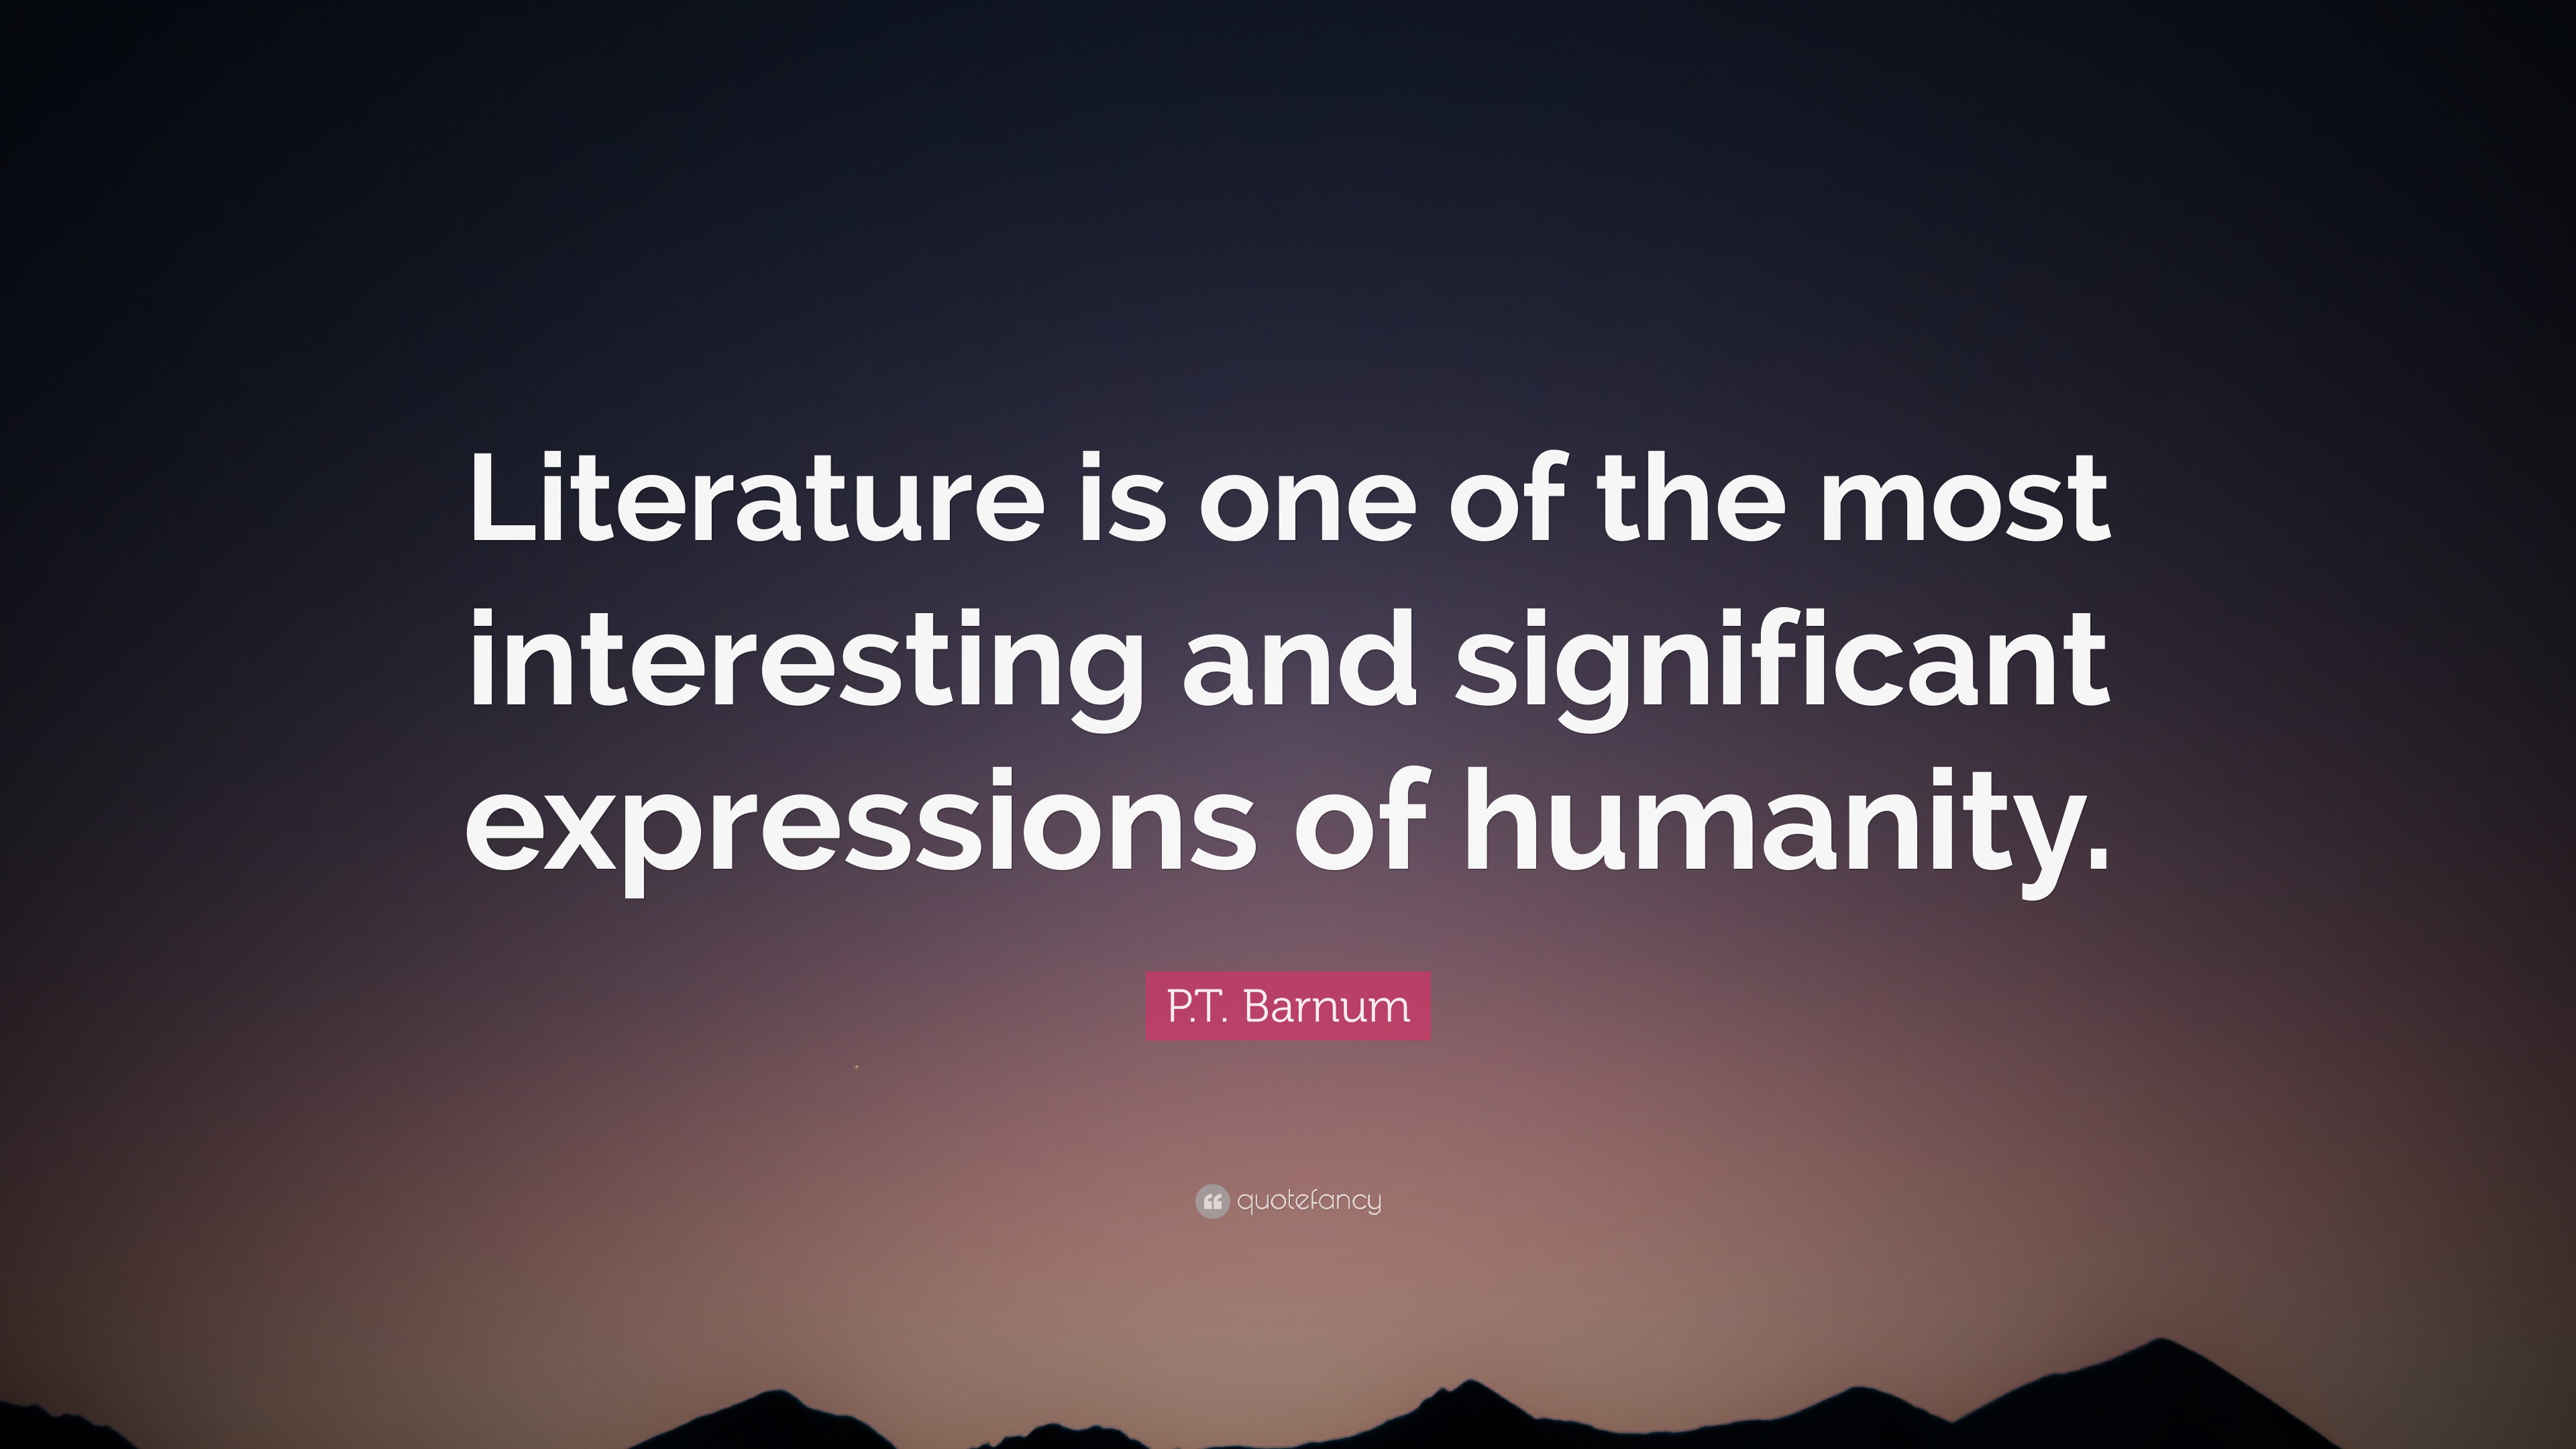 P.T. Barnum Quote: “Literature is one of the most interesting and